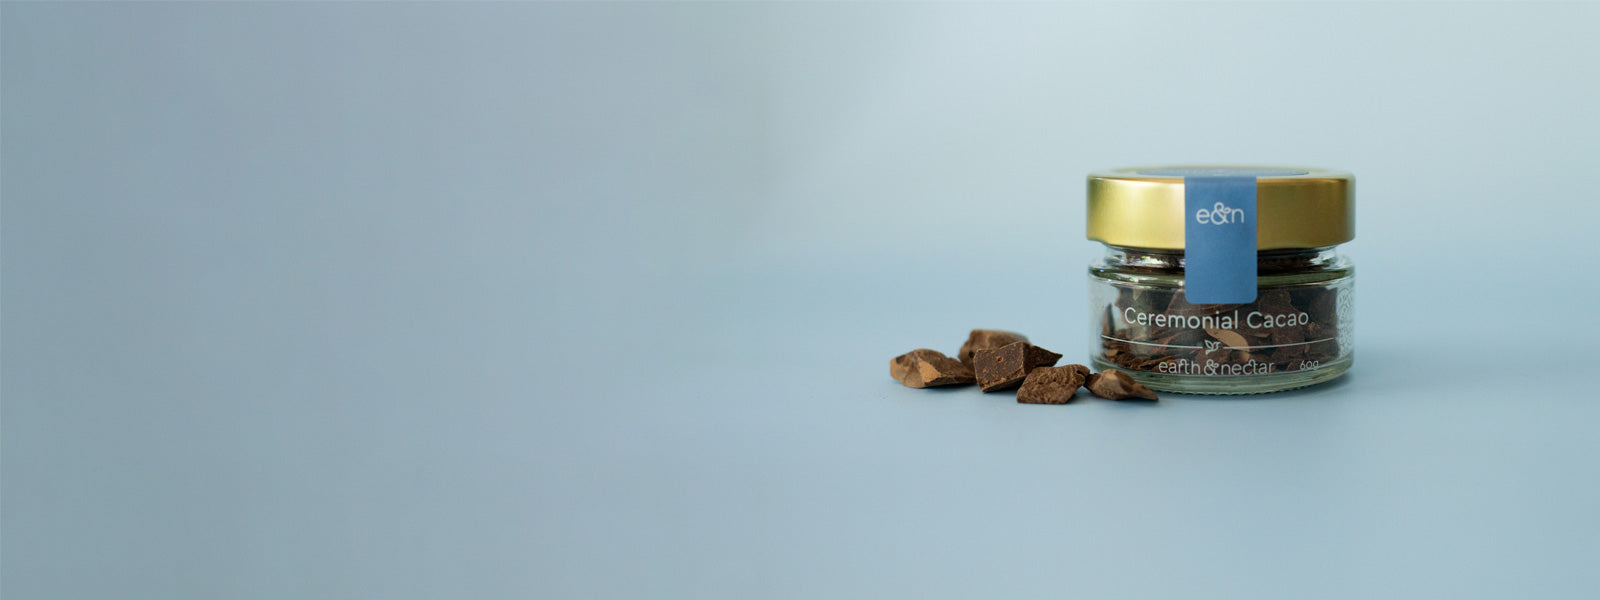 a banner image featuring a sample size jar filled with Earth and Nectar's ceremonial cacao, with chunks of ceremonial cacao placed by the side of the jar